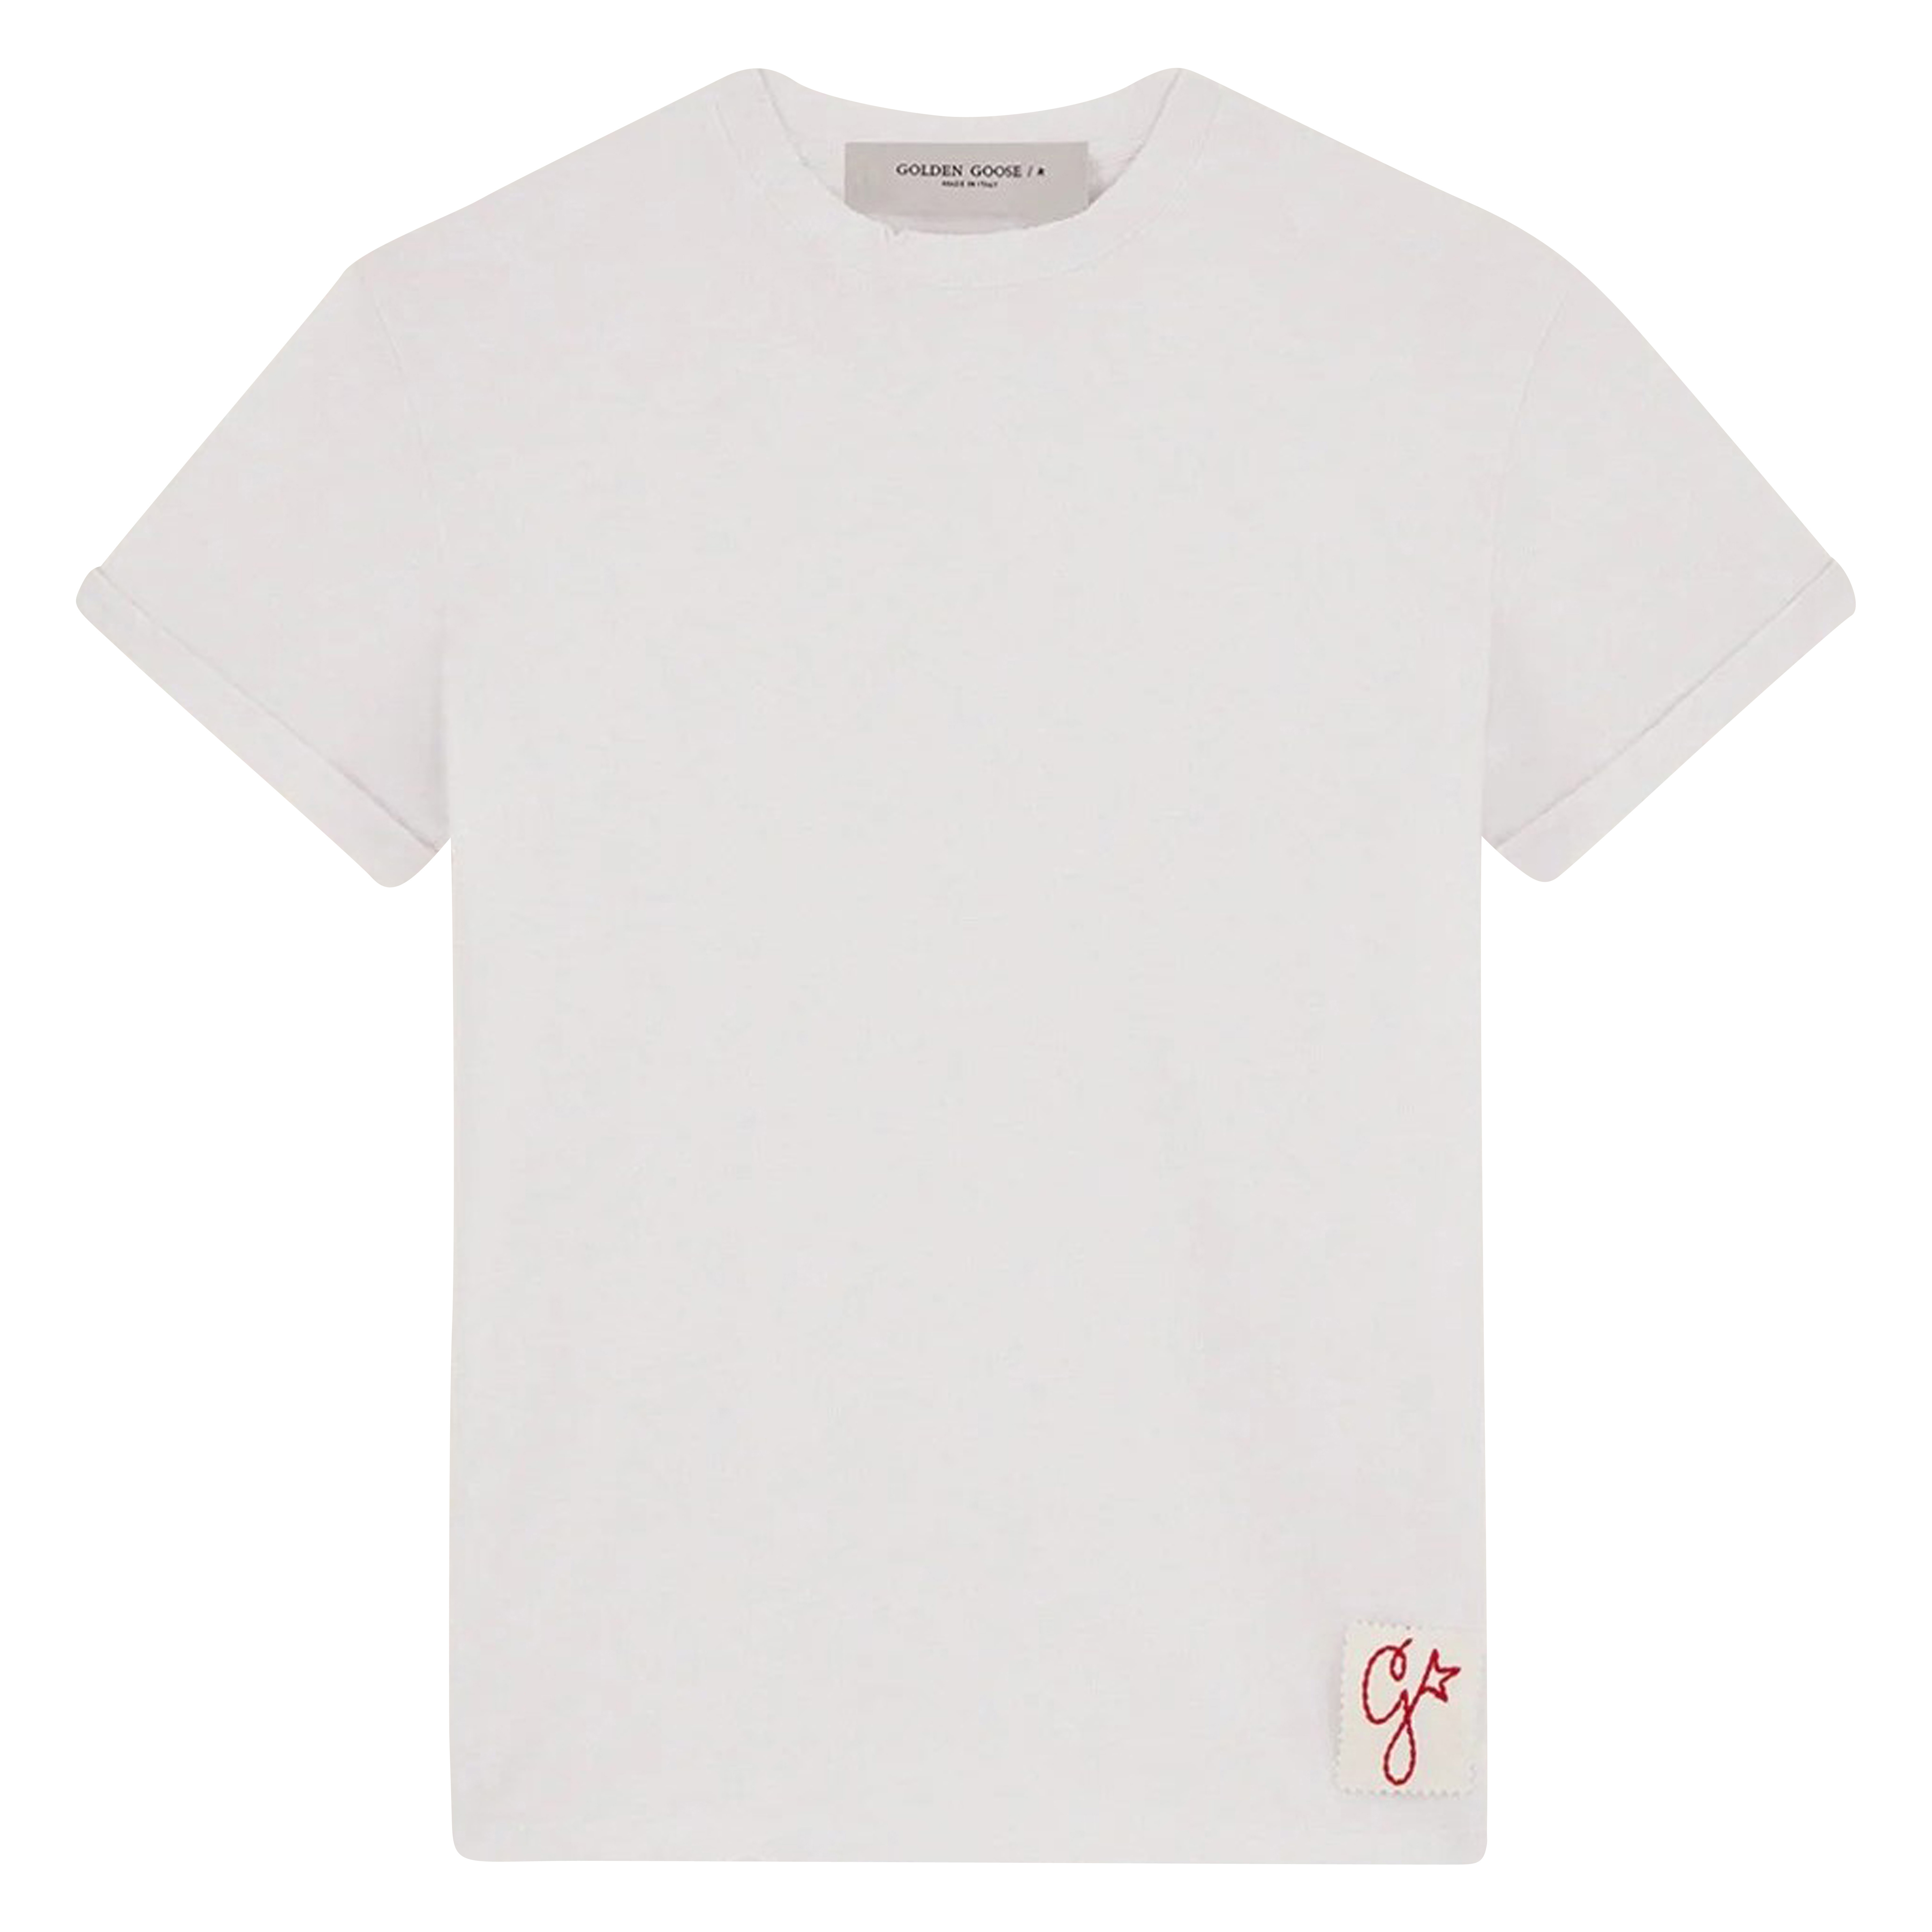 Golden Goose Slim T-Shirt Distressed in White S